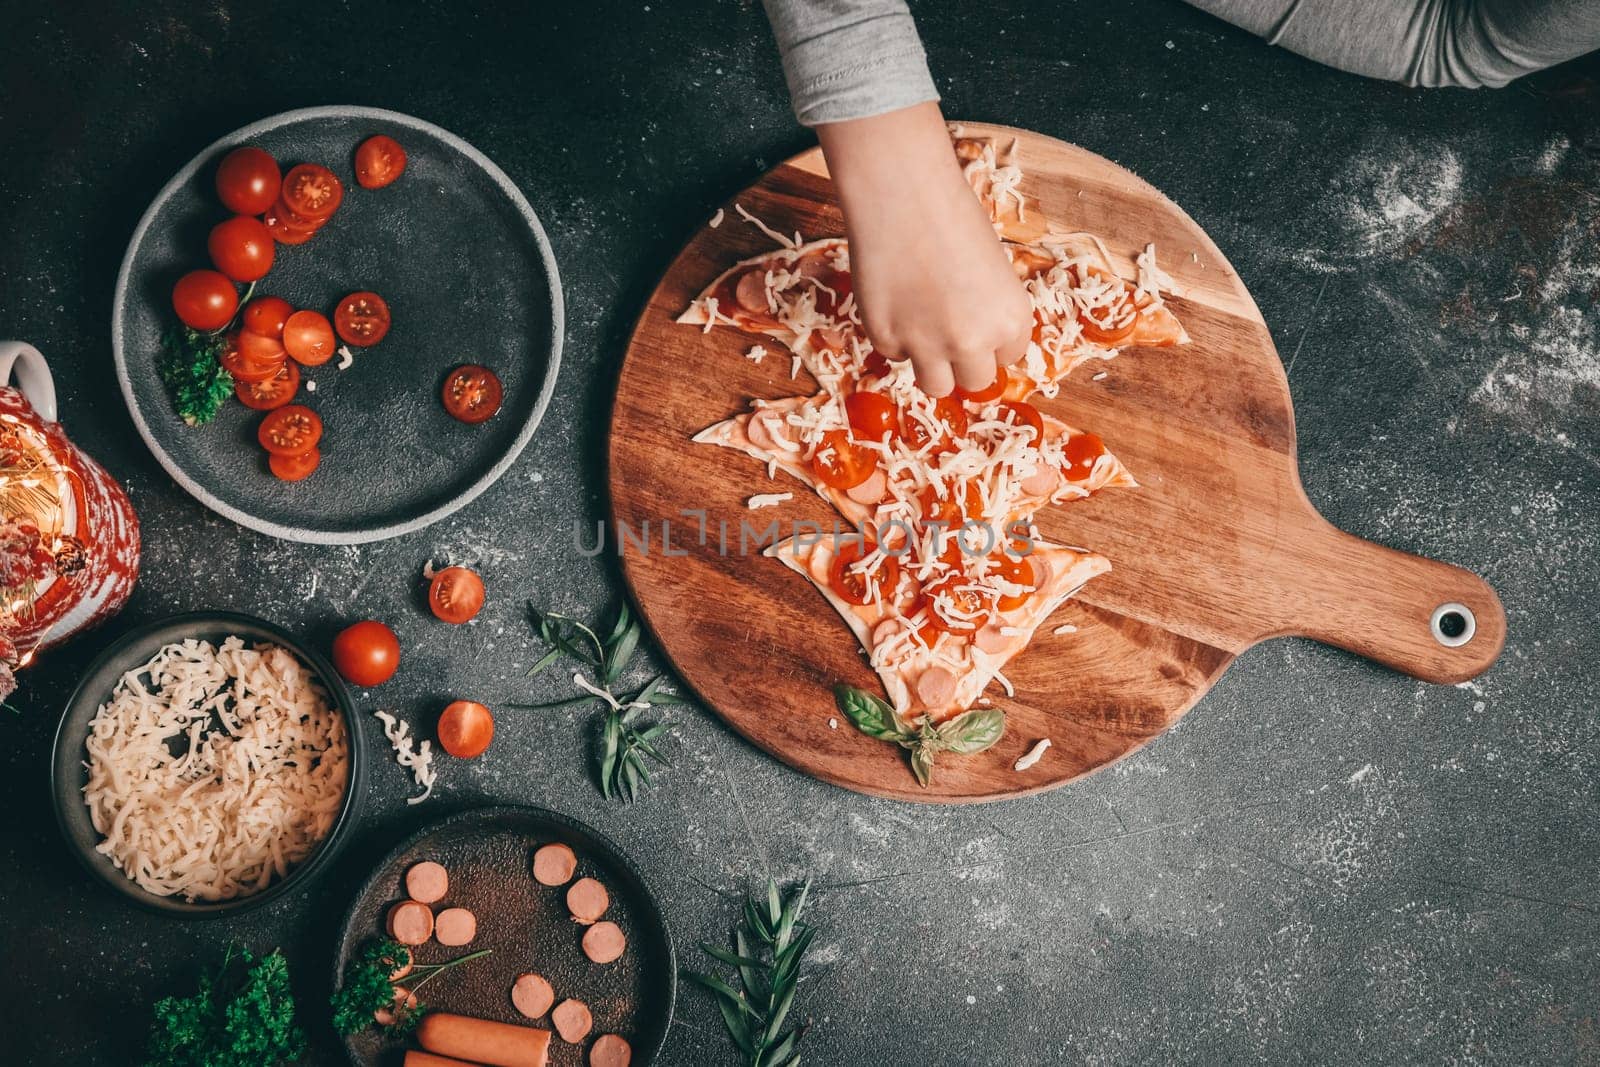 Children hand sprinkles mozzarella cheese on a Christmas tree cut from pizza dough on a cutting board lies on a dark background with cherry tomatoes, sausages and decoration, top view close-up. The concept of preparing for Christmas and New Year.